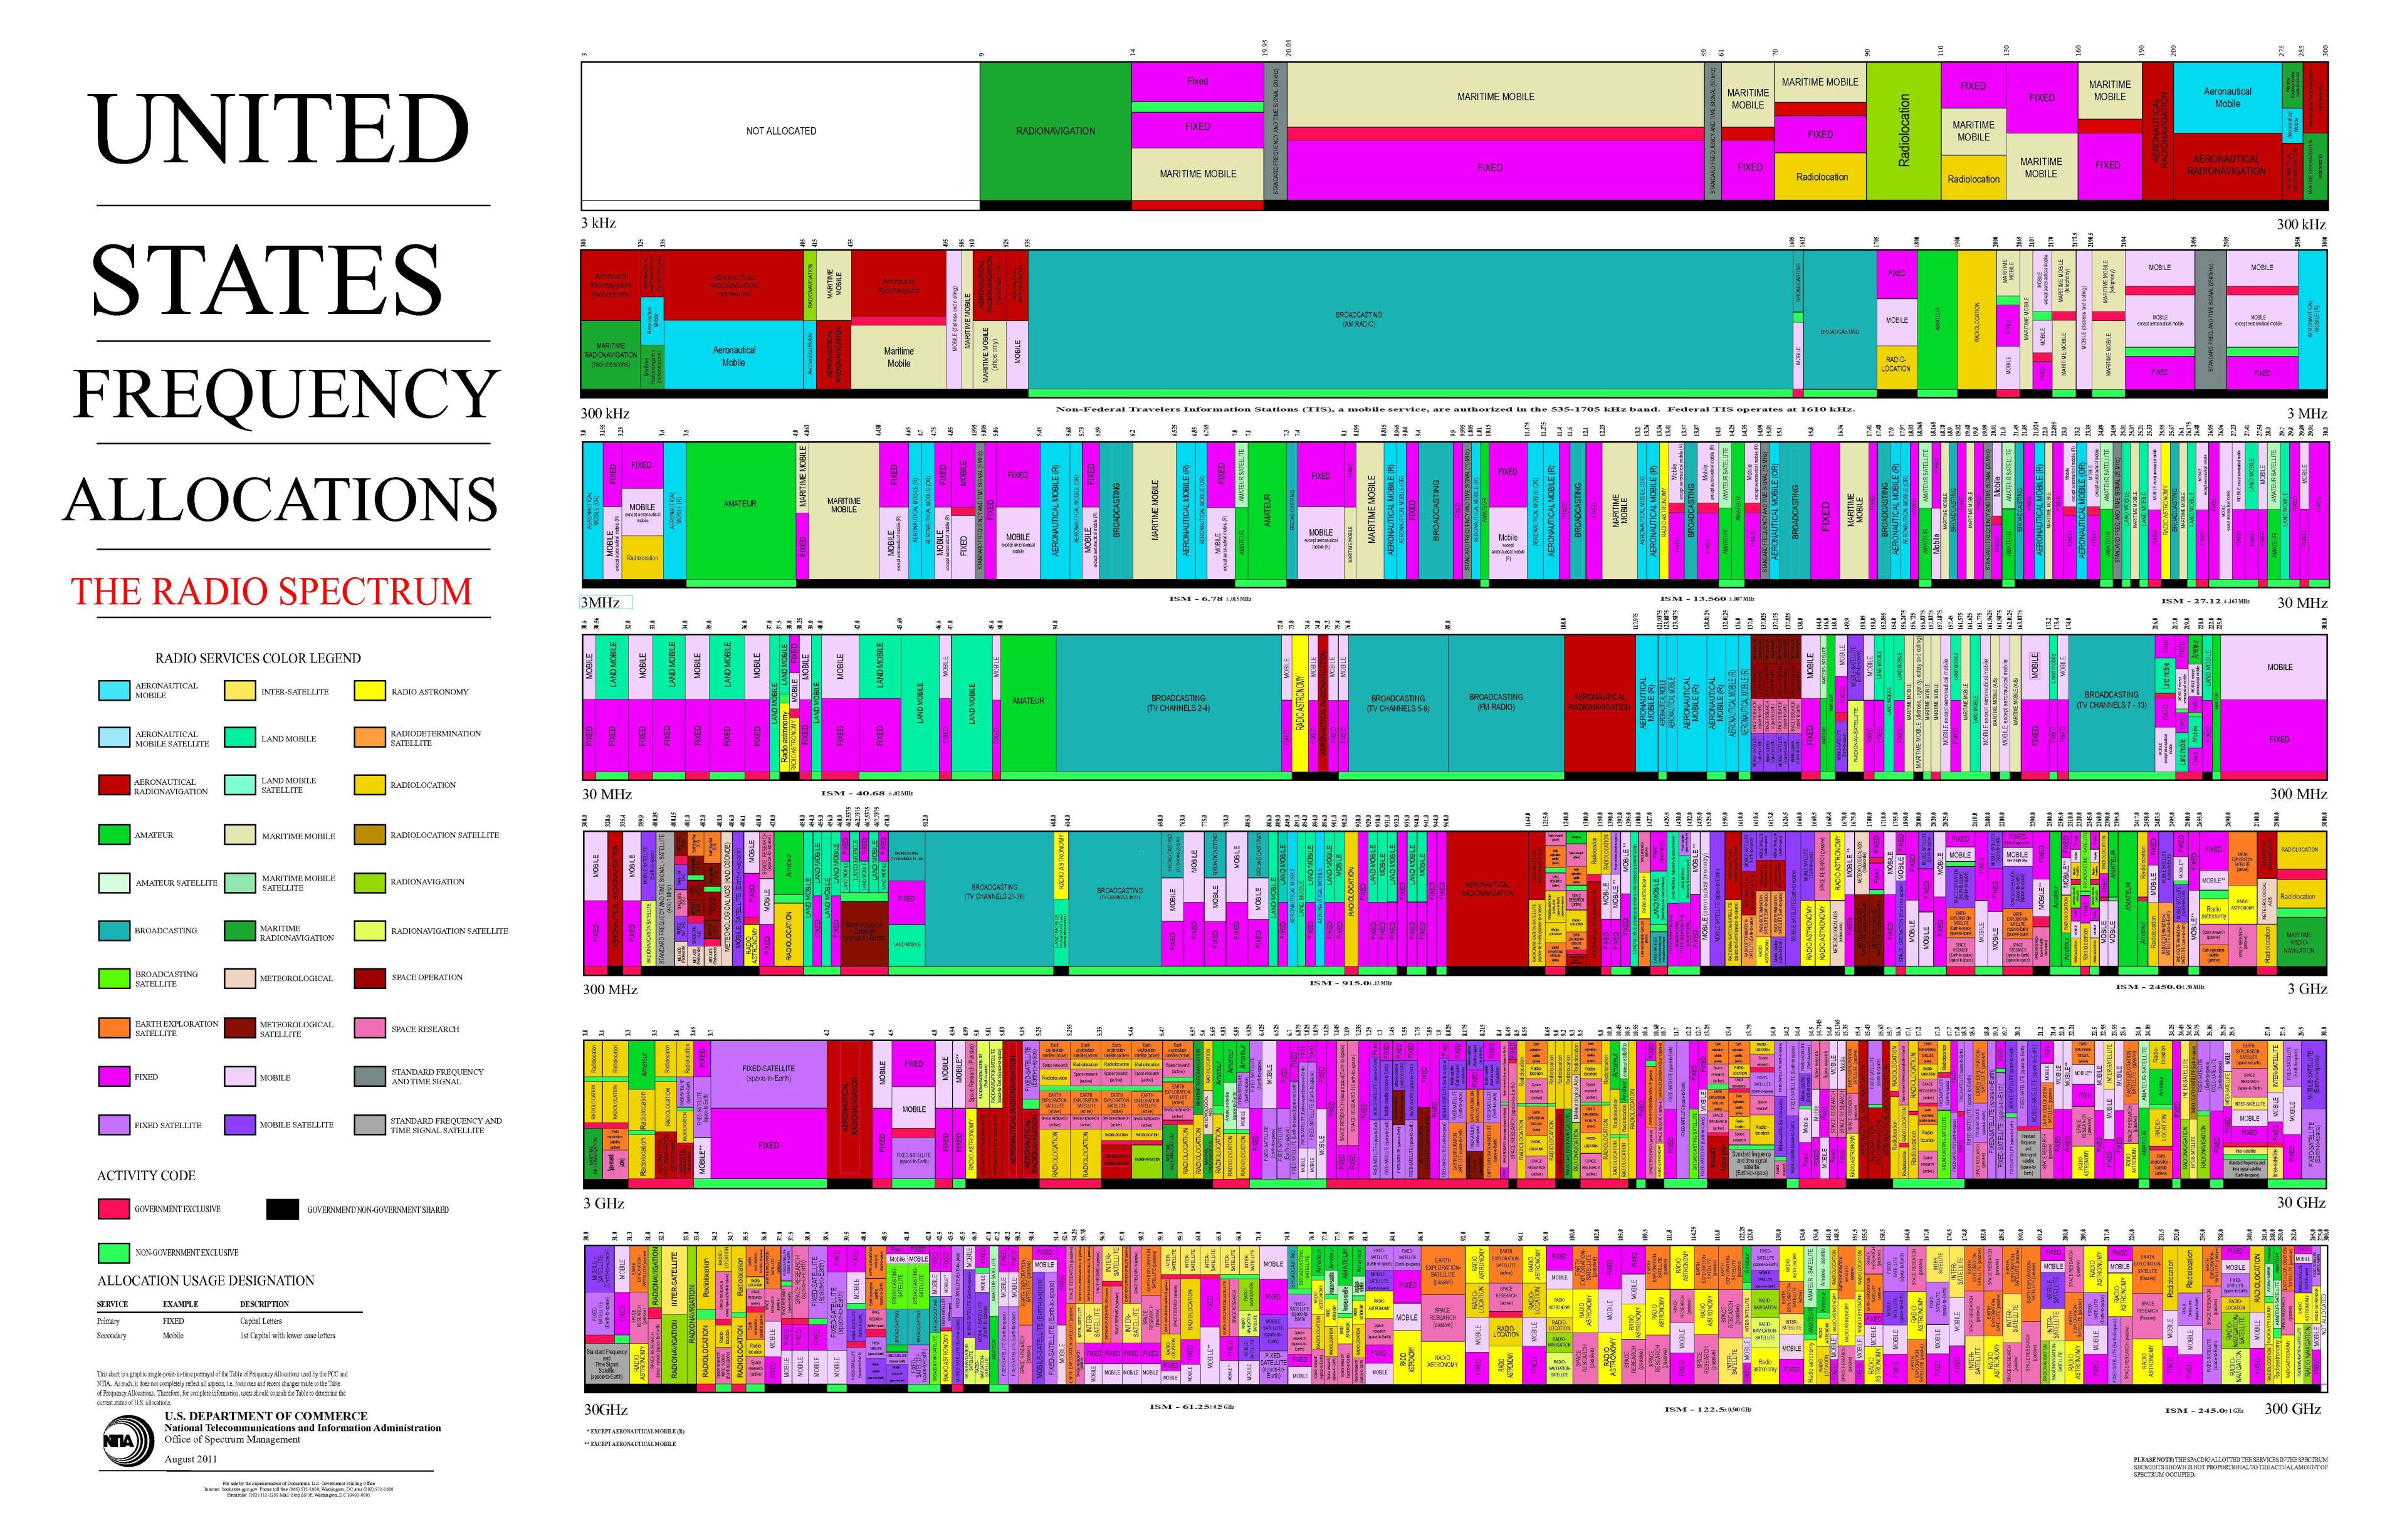 United States Frequency Allocations Chart 2011 - The Radio Spectrum